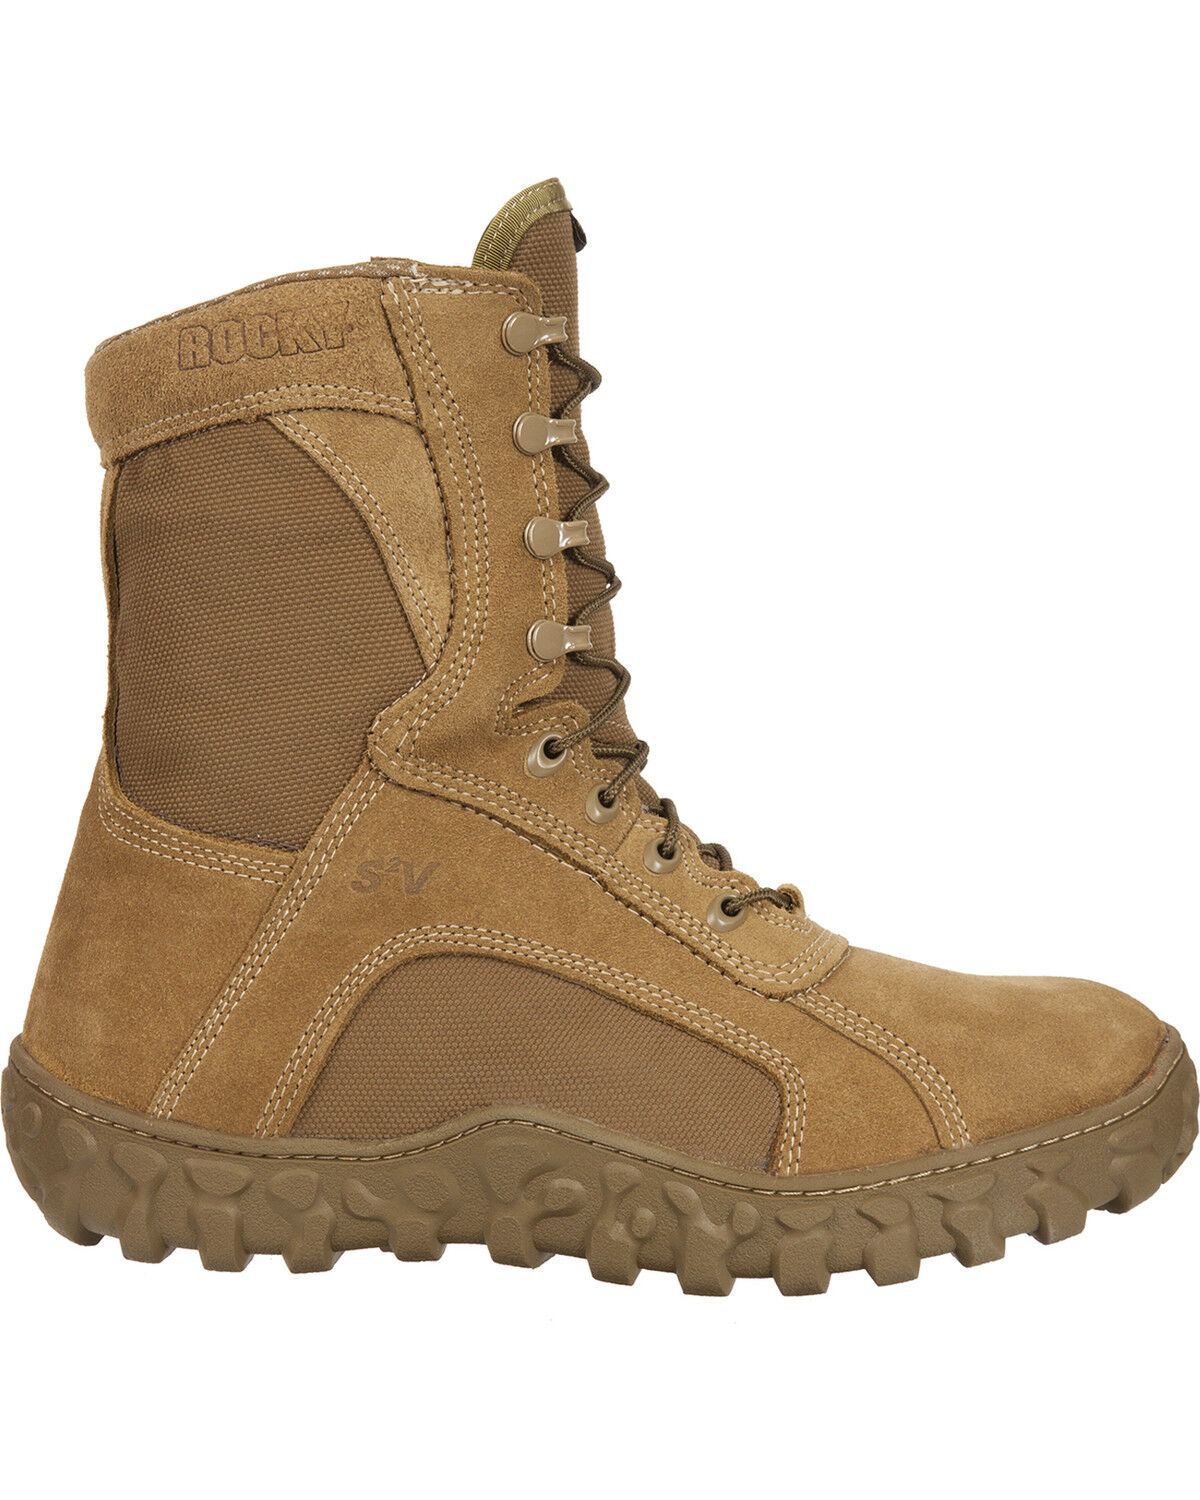 rocky insulated work boots